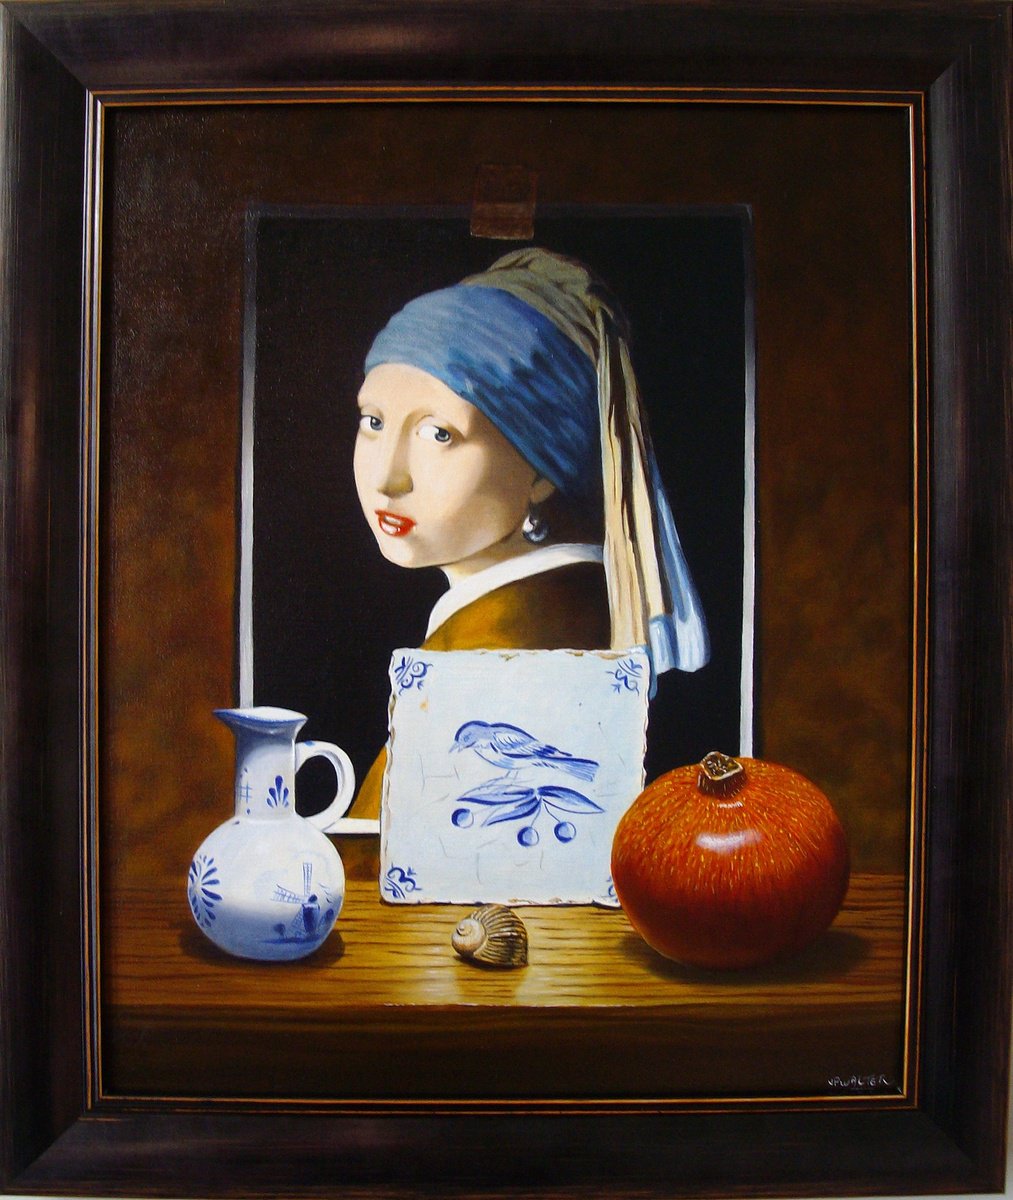 The girl from Delft with pomegranate by Jean-Pierre Walter